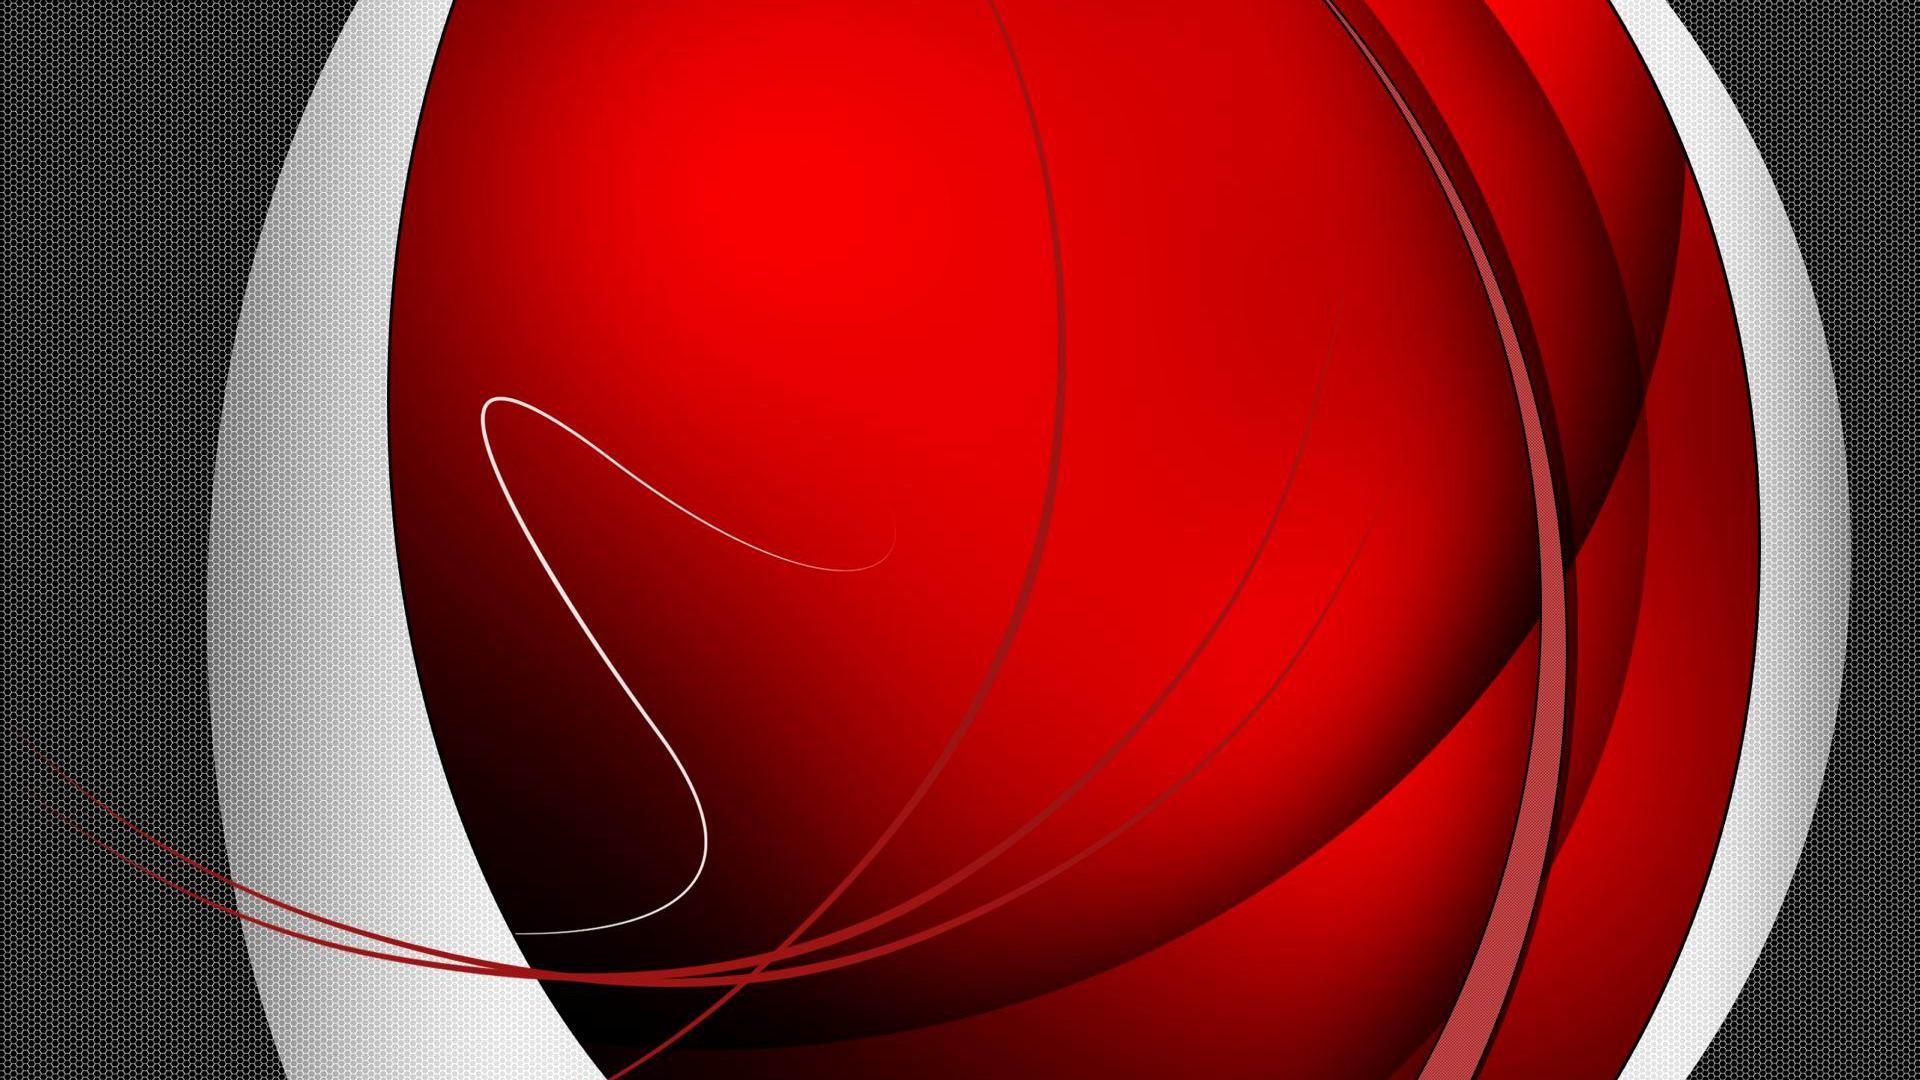 backgrounds red grey wallpaper red abstract wallpaper merah background 1920x1080